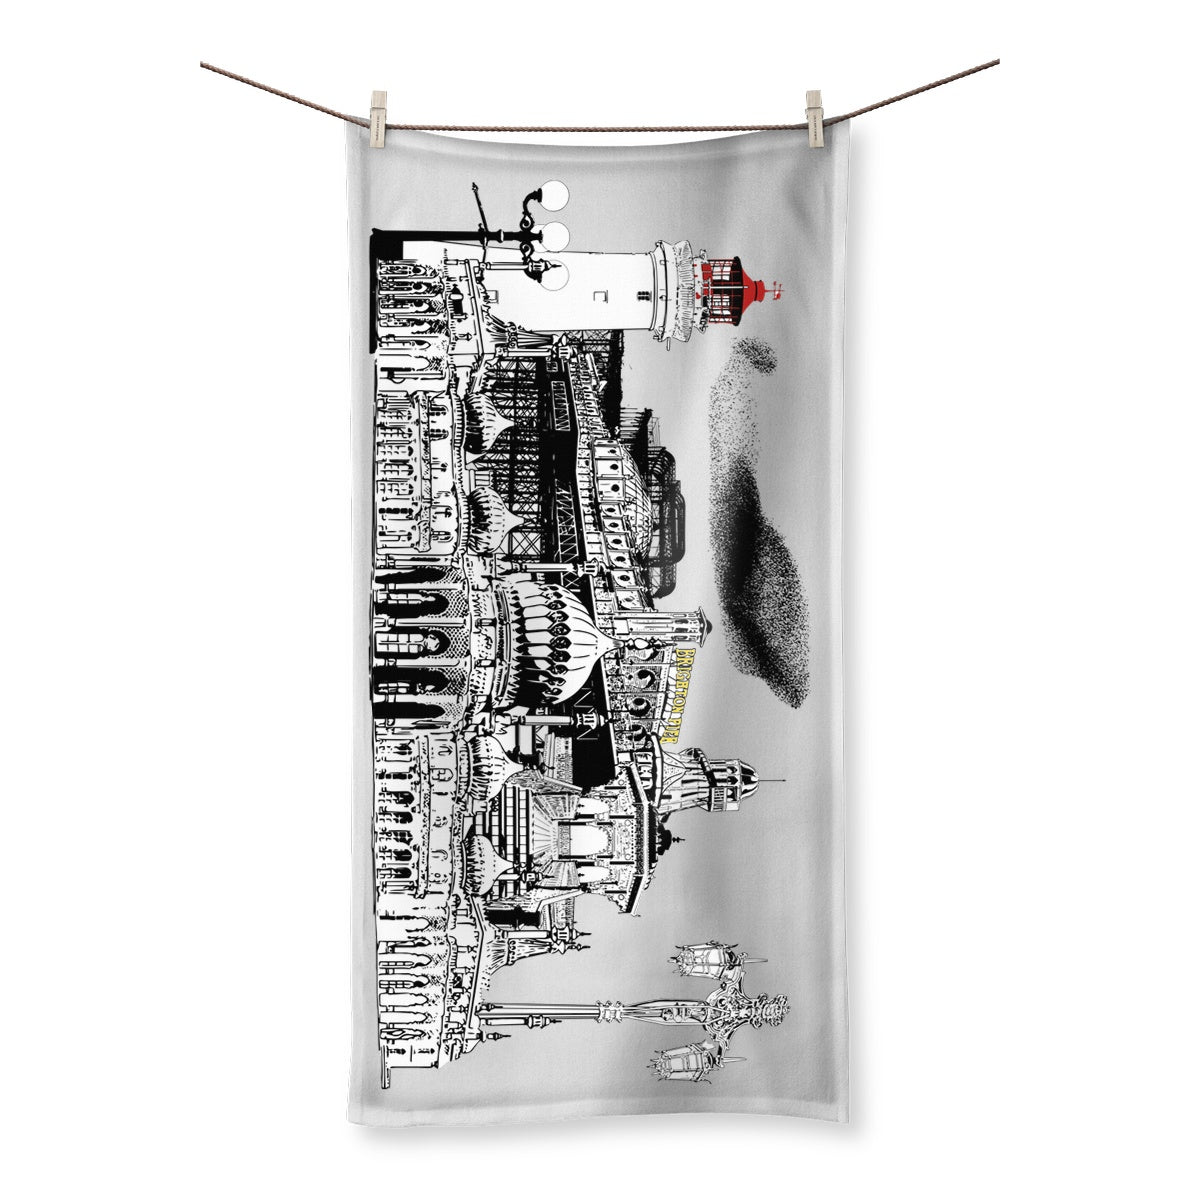 Towel with a Print of Brightons Landmarks by Powder Butterfly